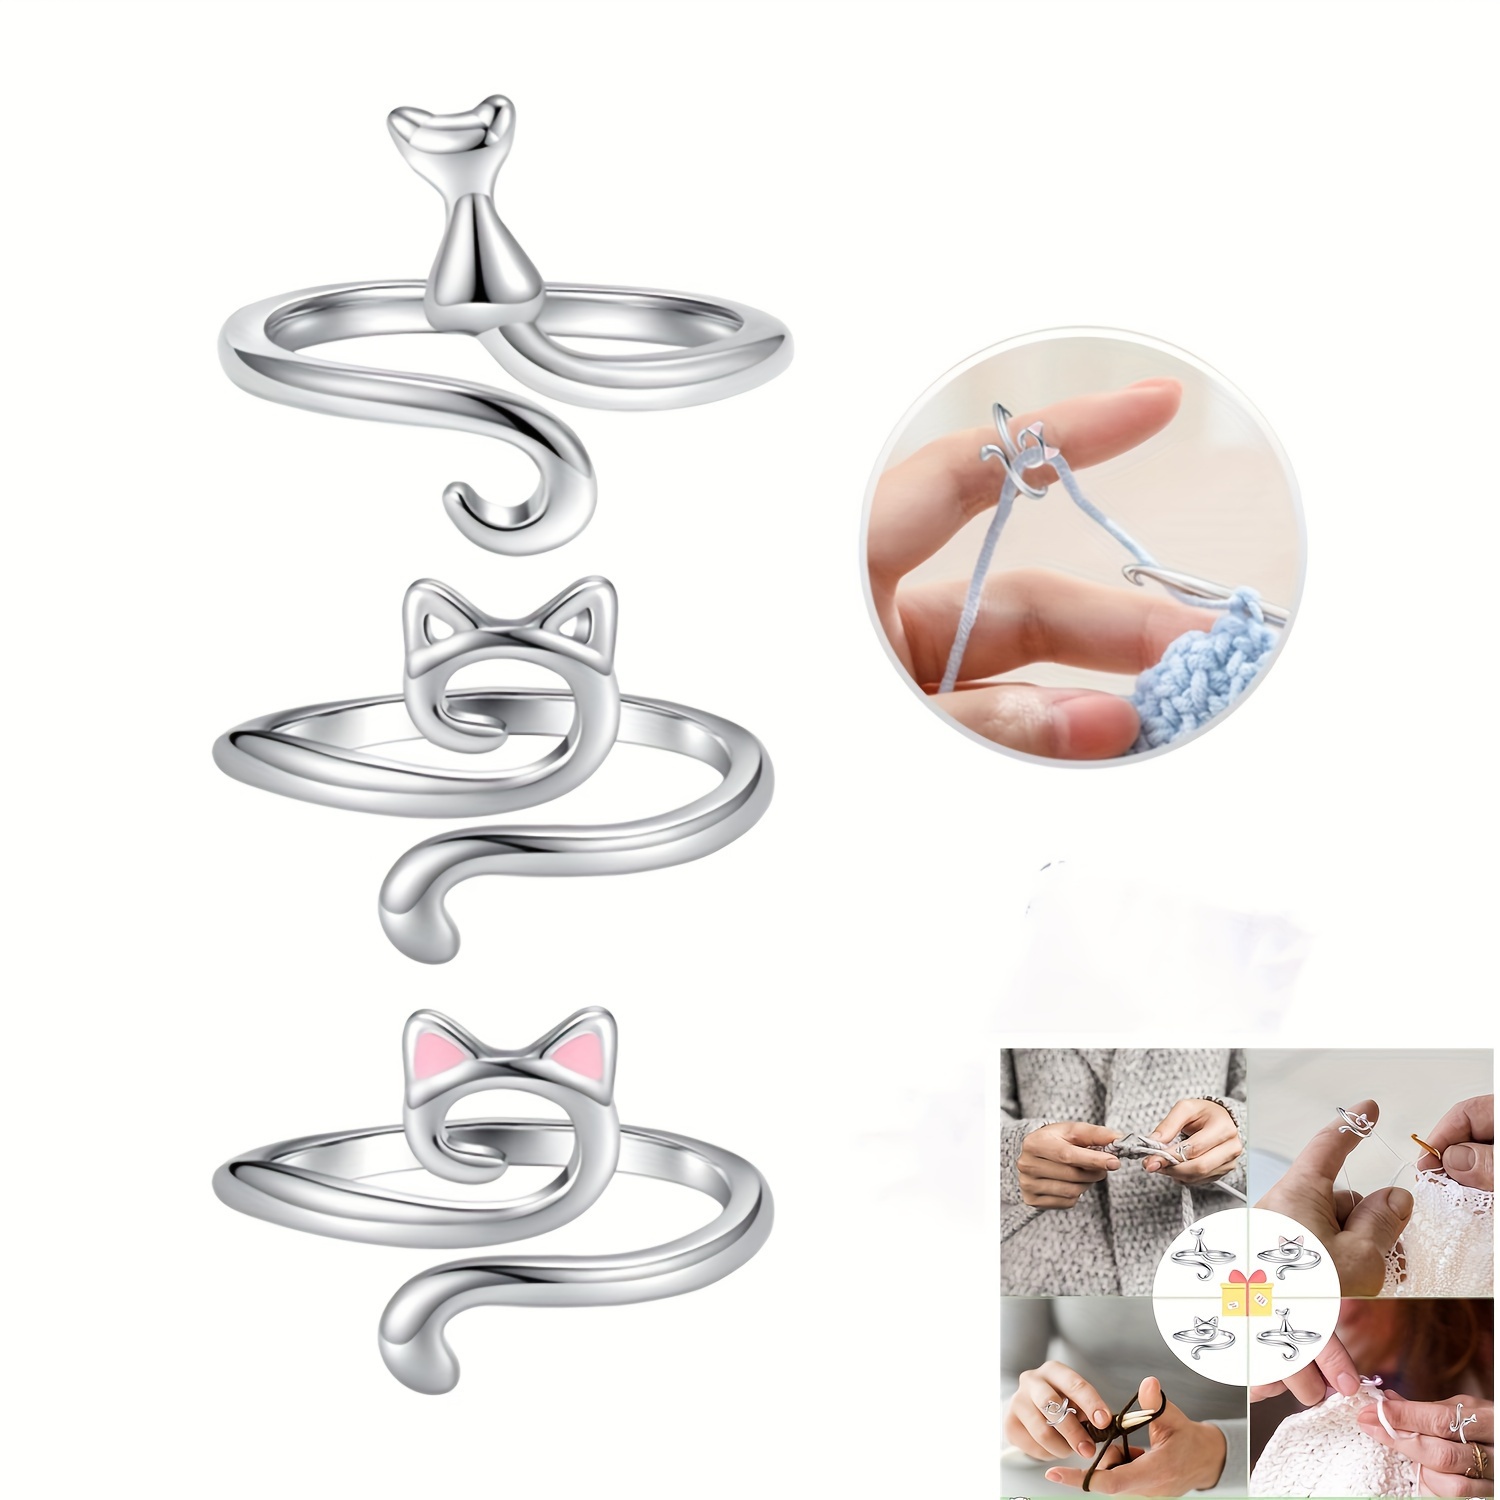 3pcs Crochet Rings For Crocheting Adjustable Crochet Tension Ring For Finger  Cat Yarn Guide Ring Knitting Crochet Accessories For Women, Shop Now For  Limited-time Deals